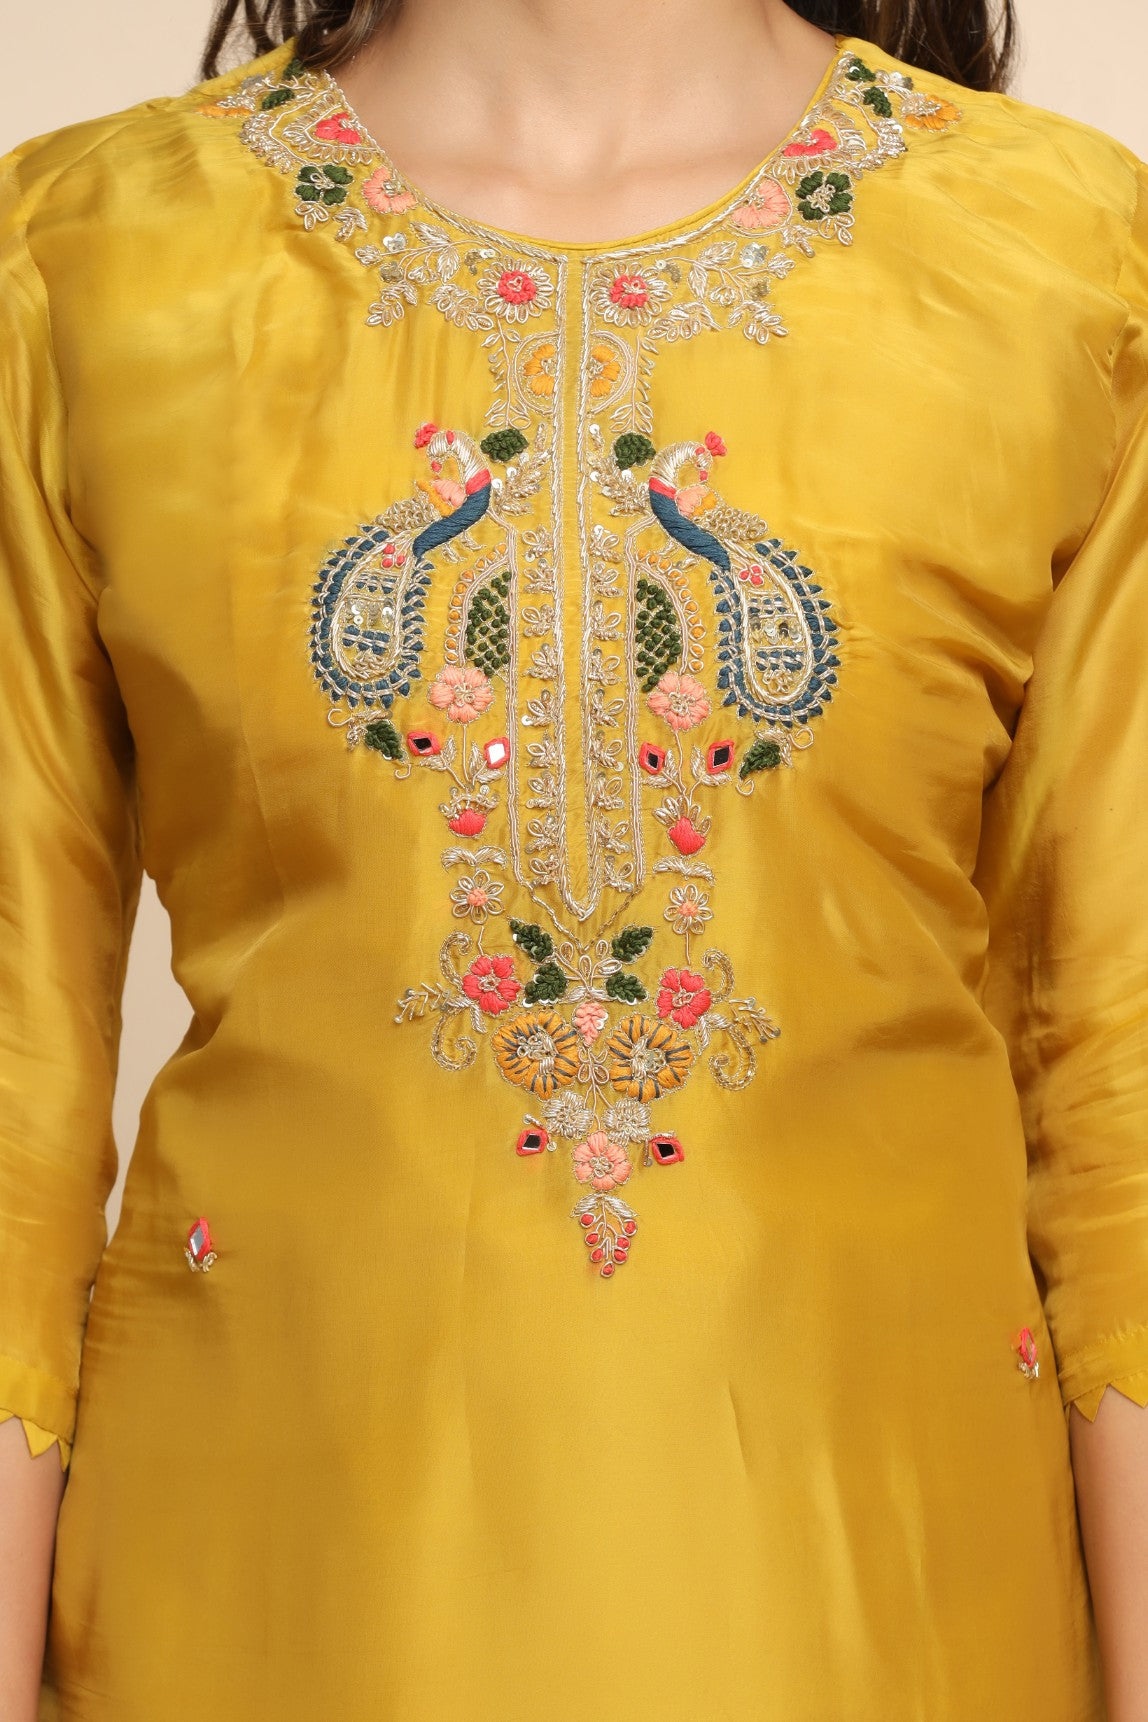 girl wearing a Beautiful Mustard Color Floral Embroidered Suit Set